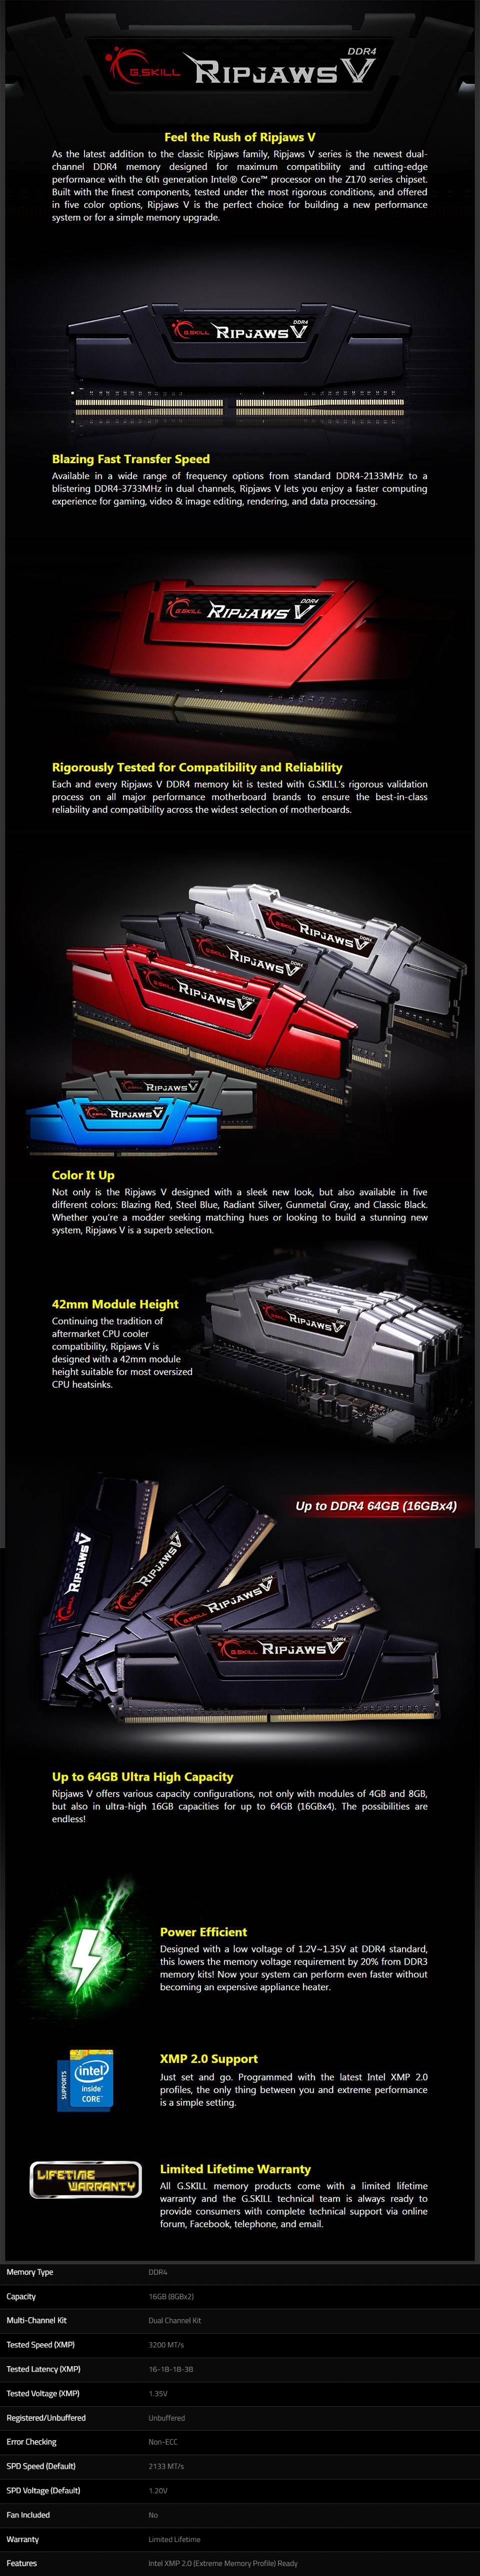 A large marketing image providing additional information about the product G.Skill 16GB Kit (2x8GB) DDR4 Ripjaws V C16 3200MHz -  Black - Additional alt info not provided